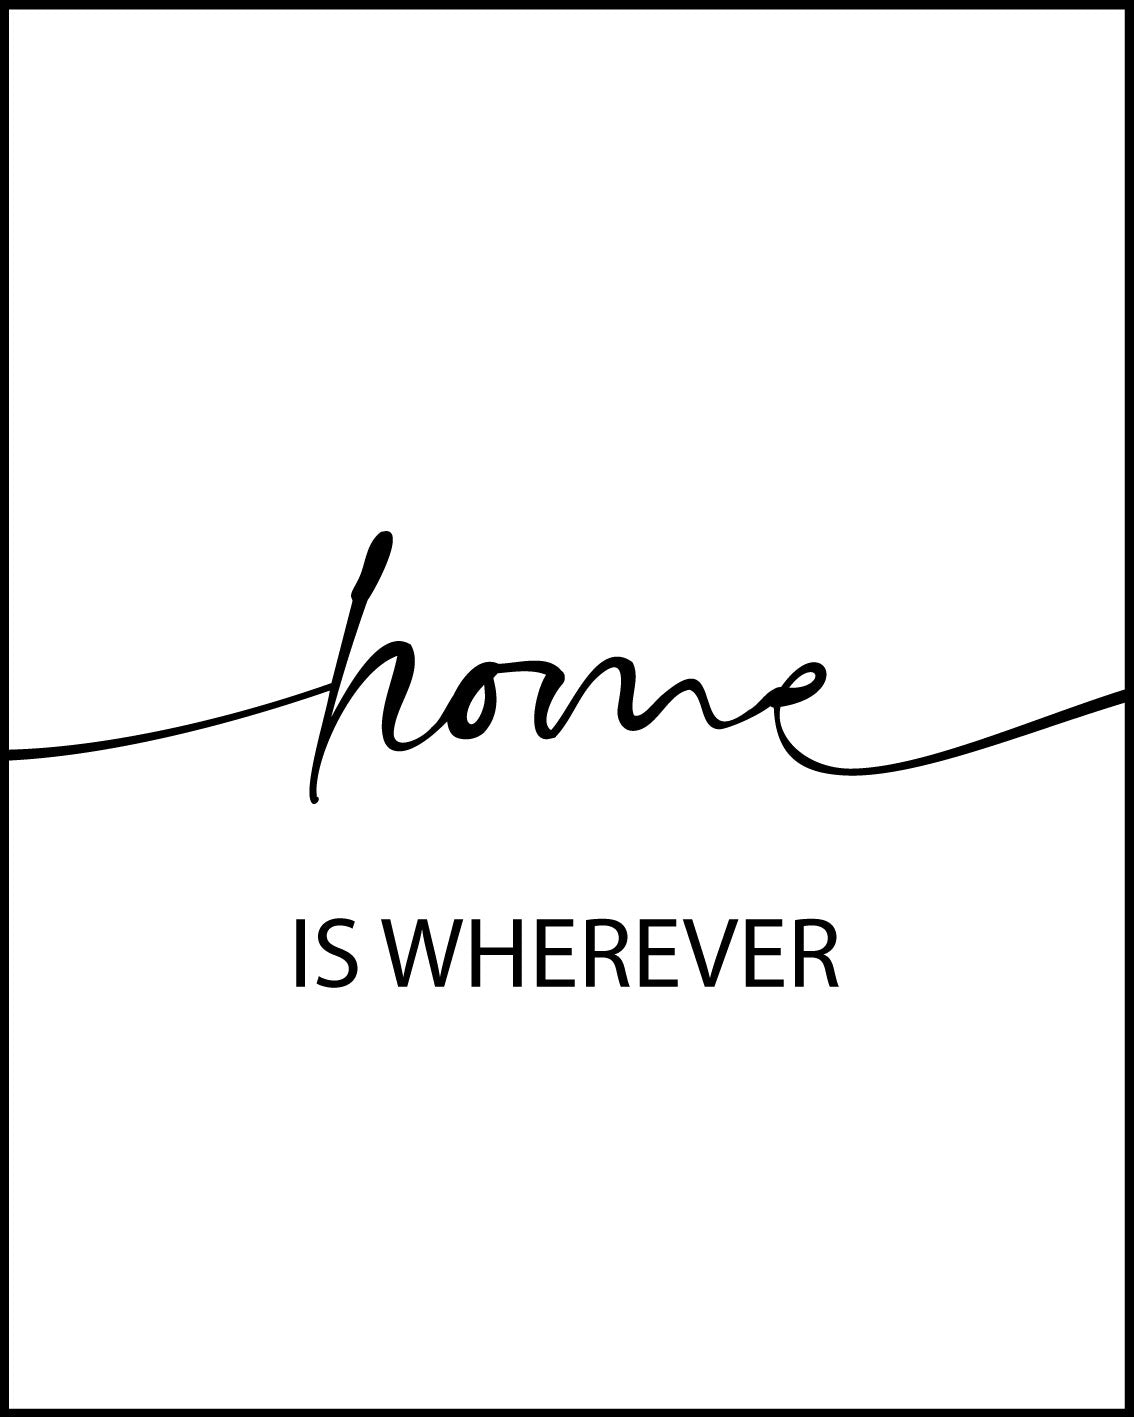 Home is wherever I am with you Posters